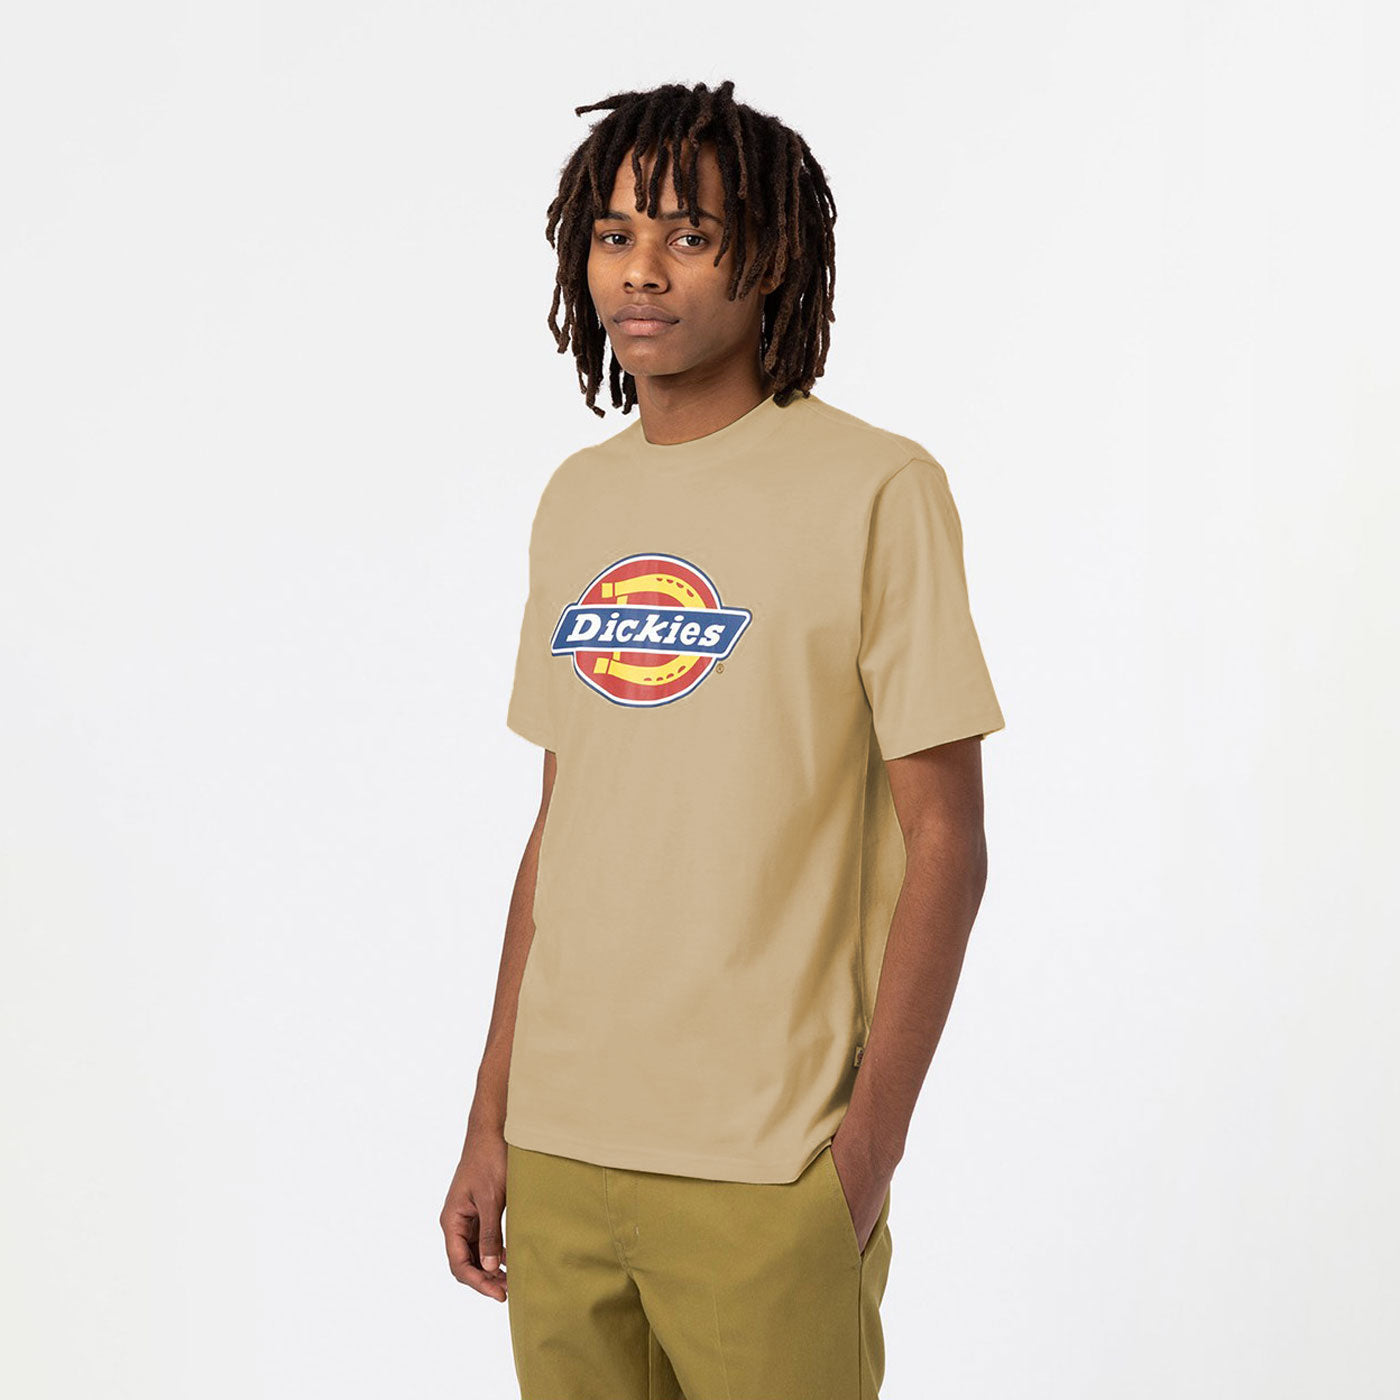 fusion Parlament Uenighed Dickies Dickies Skateboarding Distressed OG Graphic T-Shirt